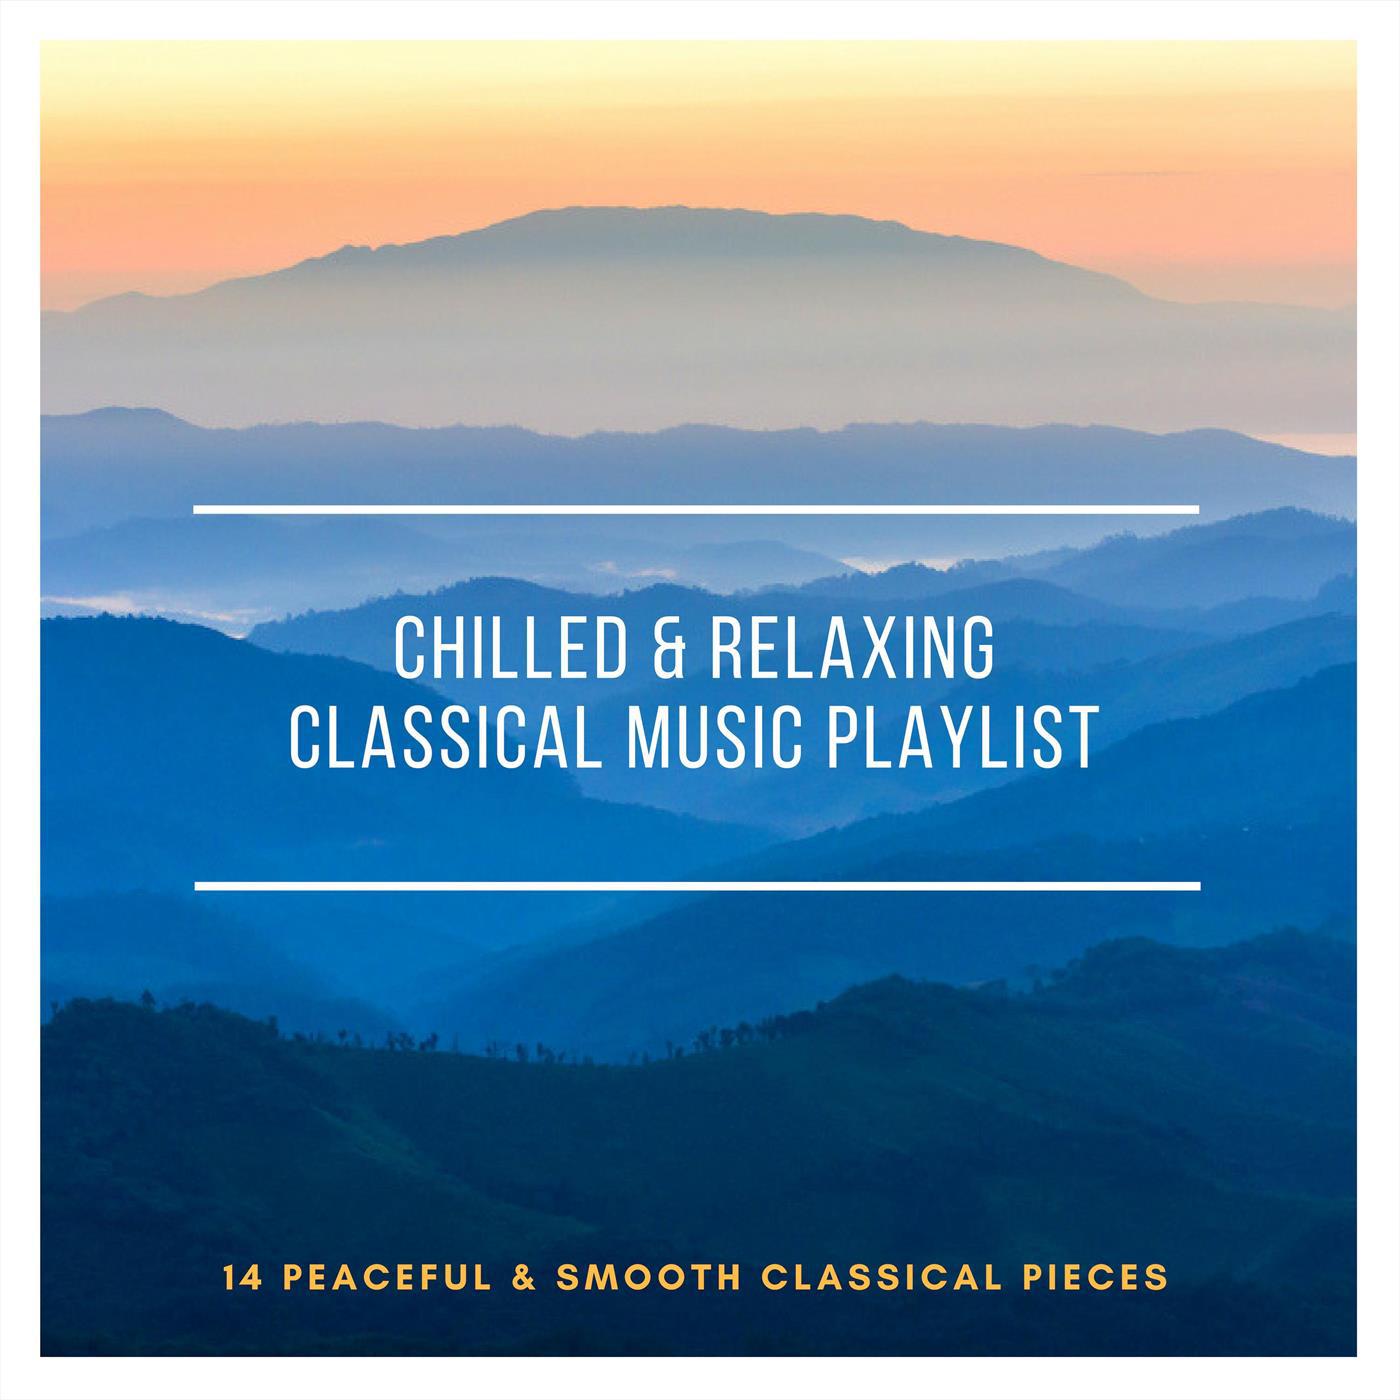 Chilled and Relaxing Classical Music Playlist: 14 Peaceful and Smooth Classical Pieces